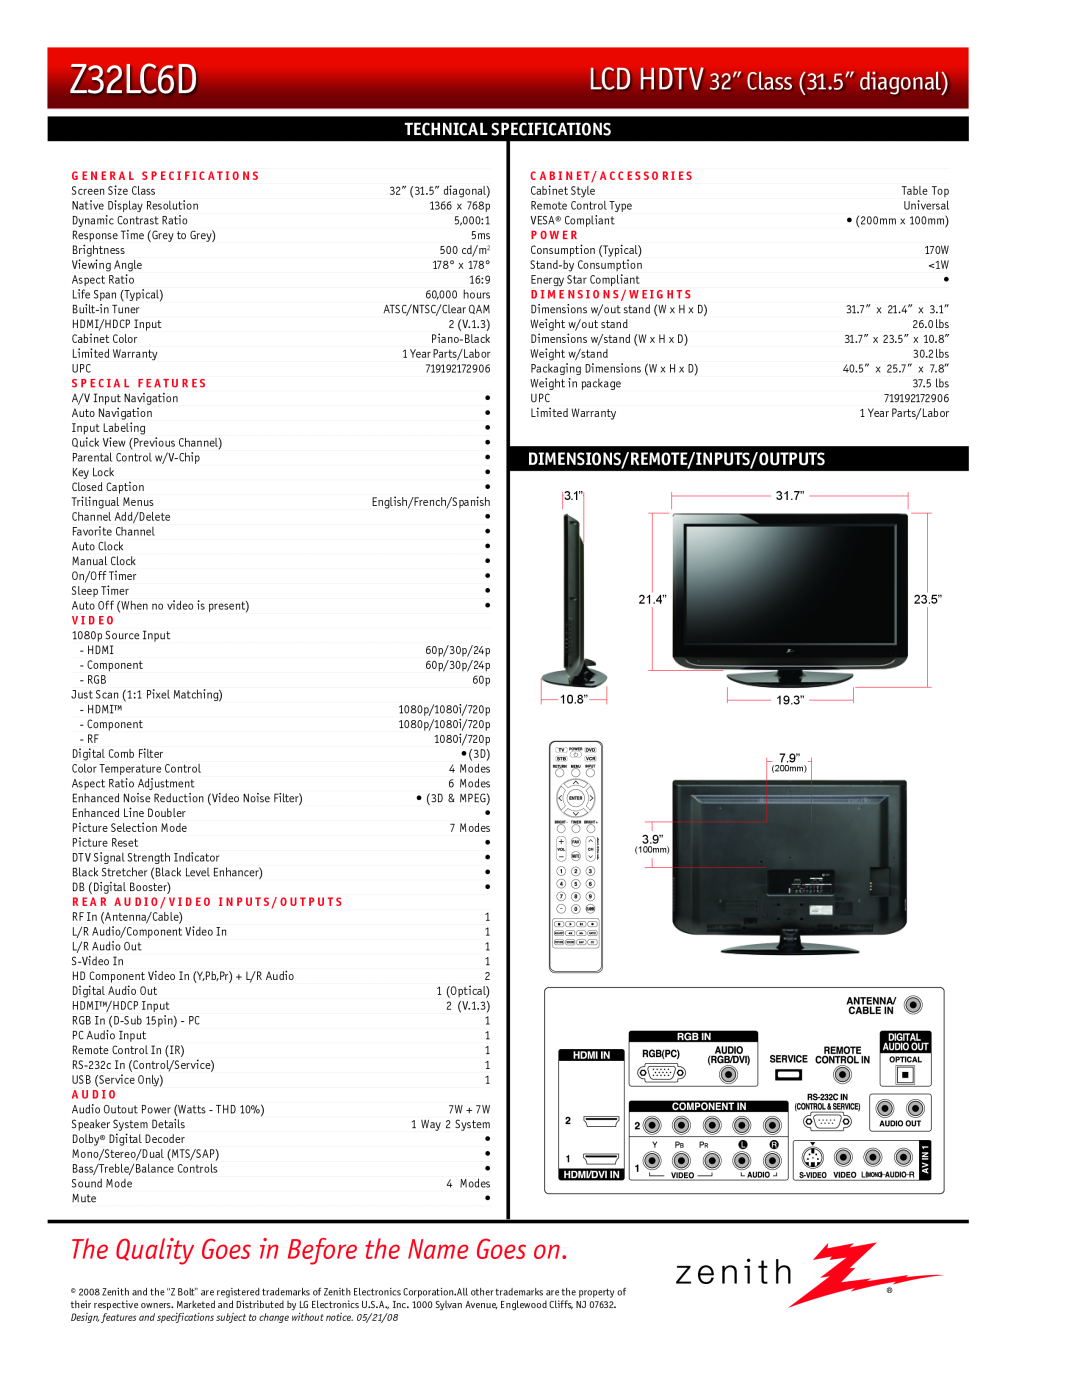 Zenith Z32LC6D Technical Specifications, The Quality Goes in Before the Name Goes on, LCD HDTV 32Ó Class 31.5Ó diagonal 